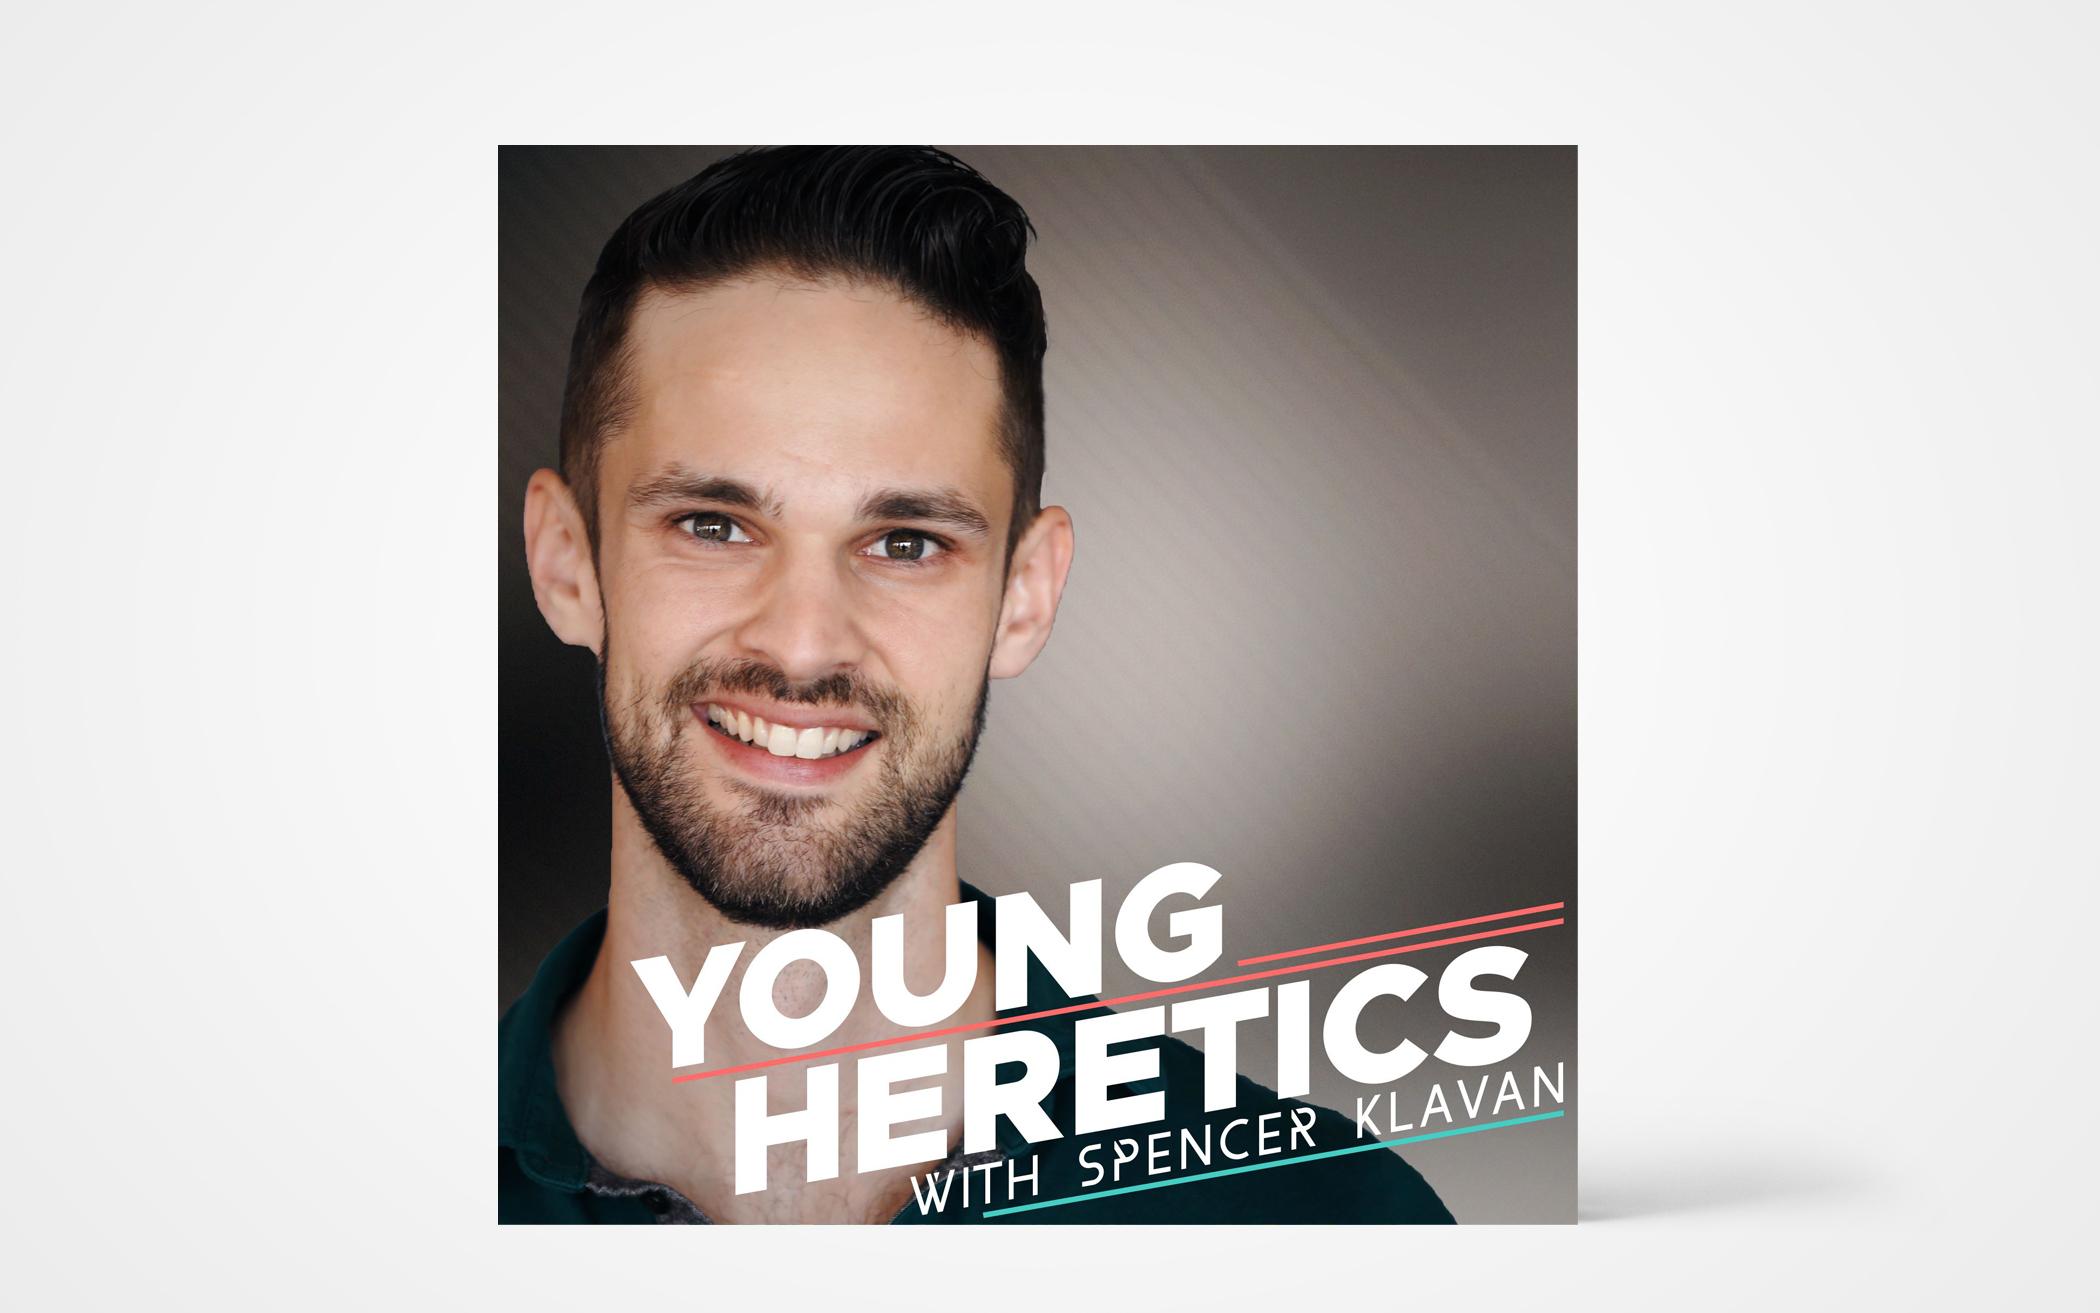 The Young Heretics Podcast